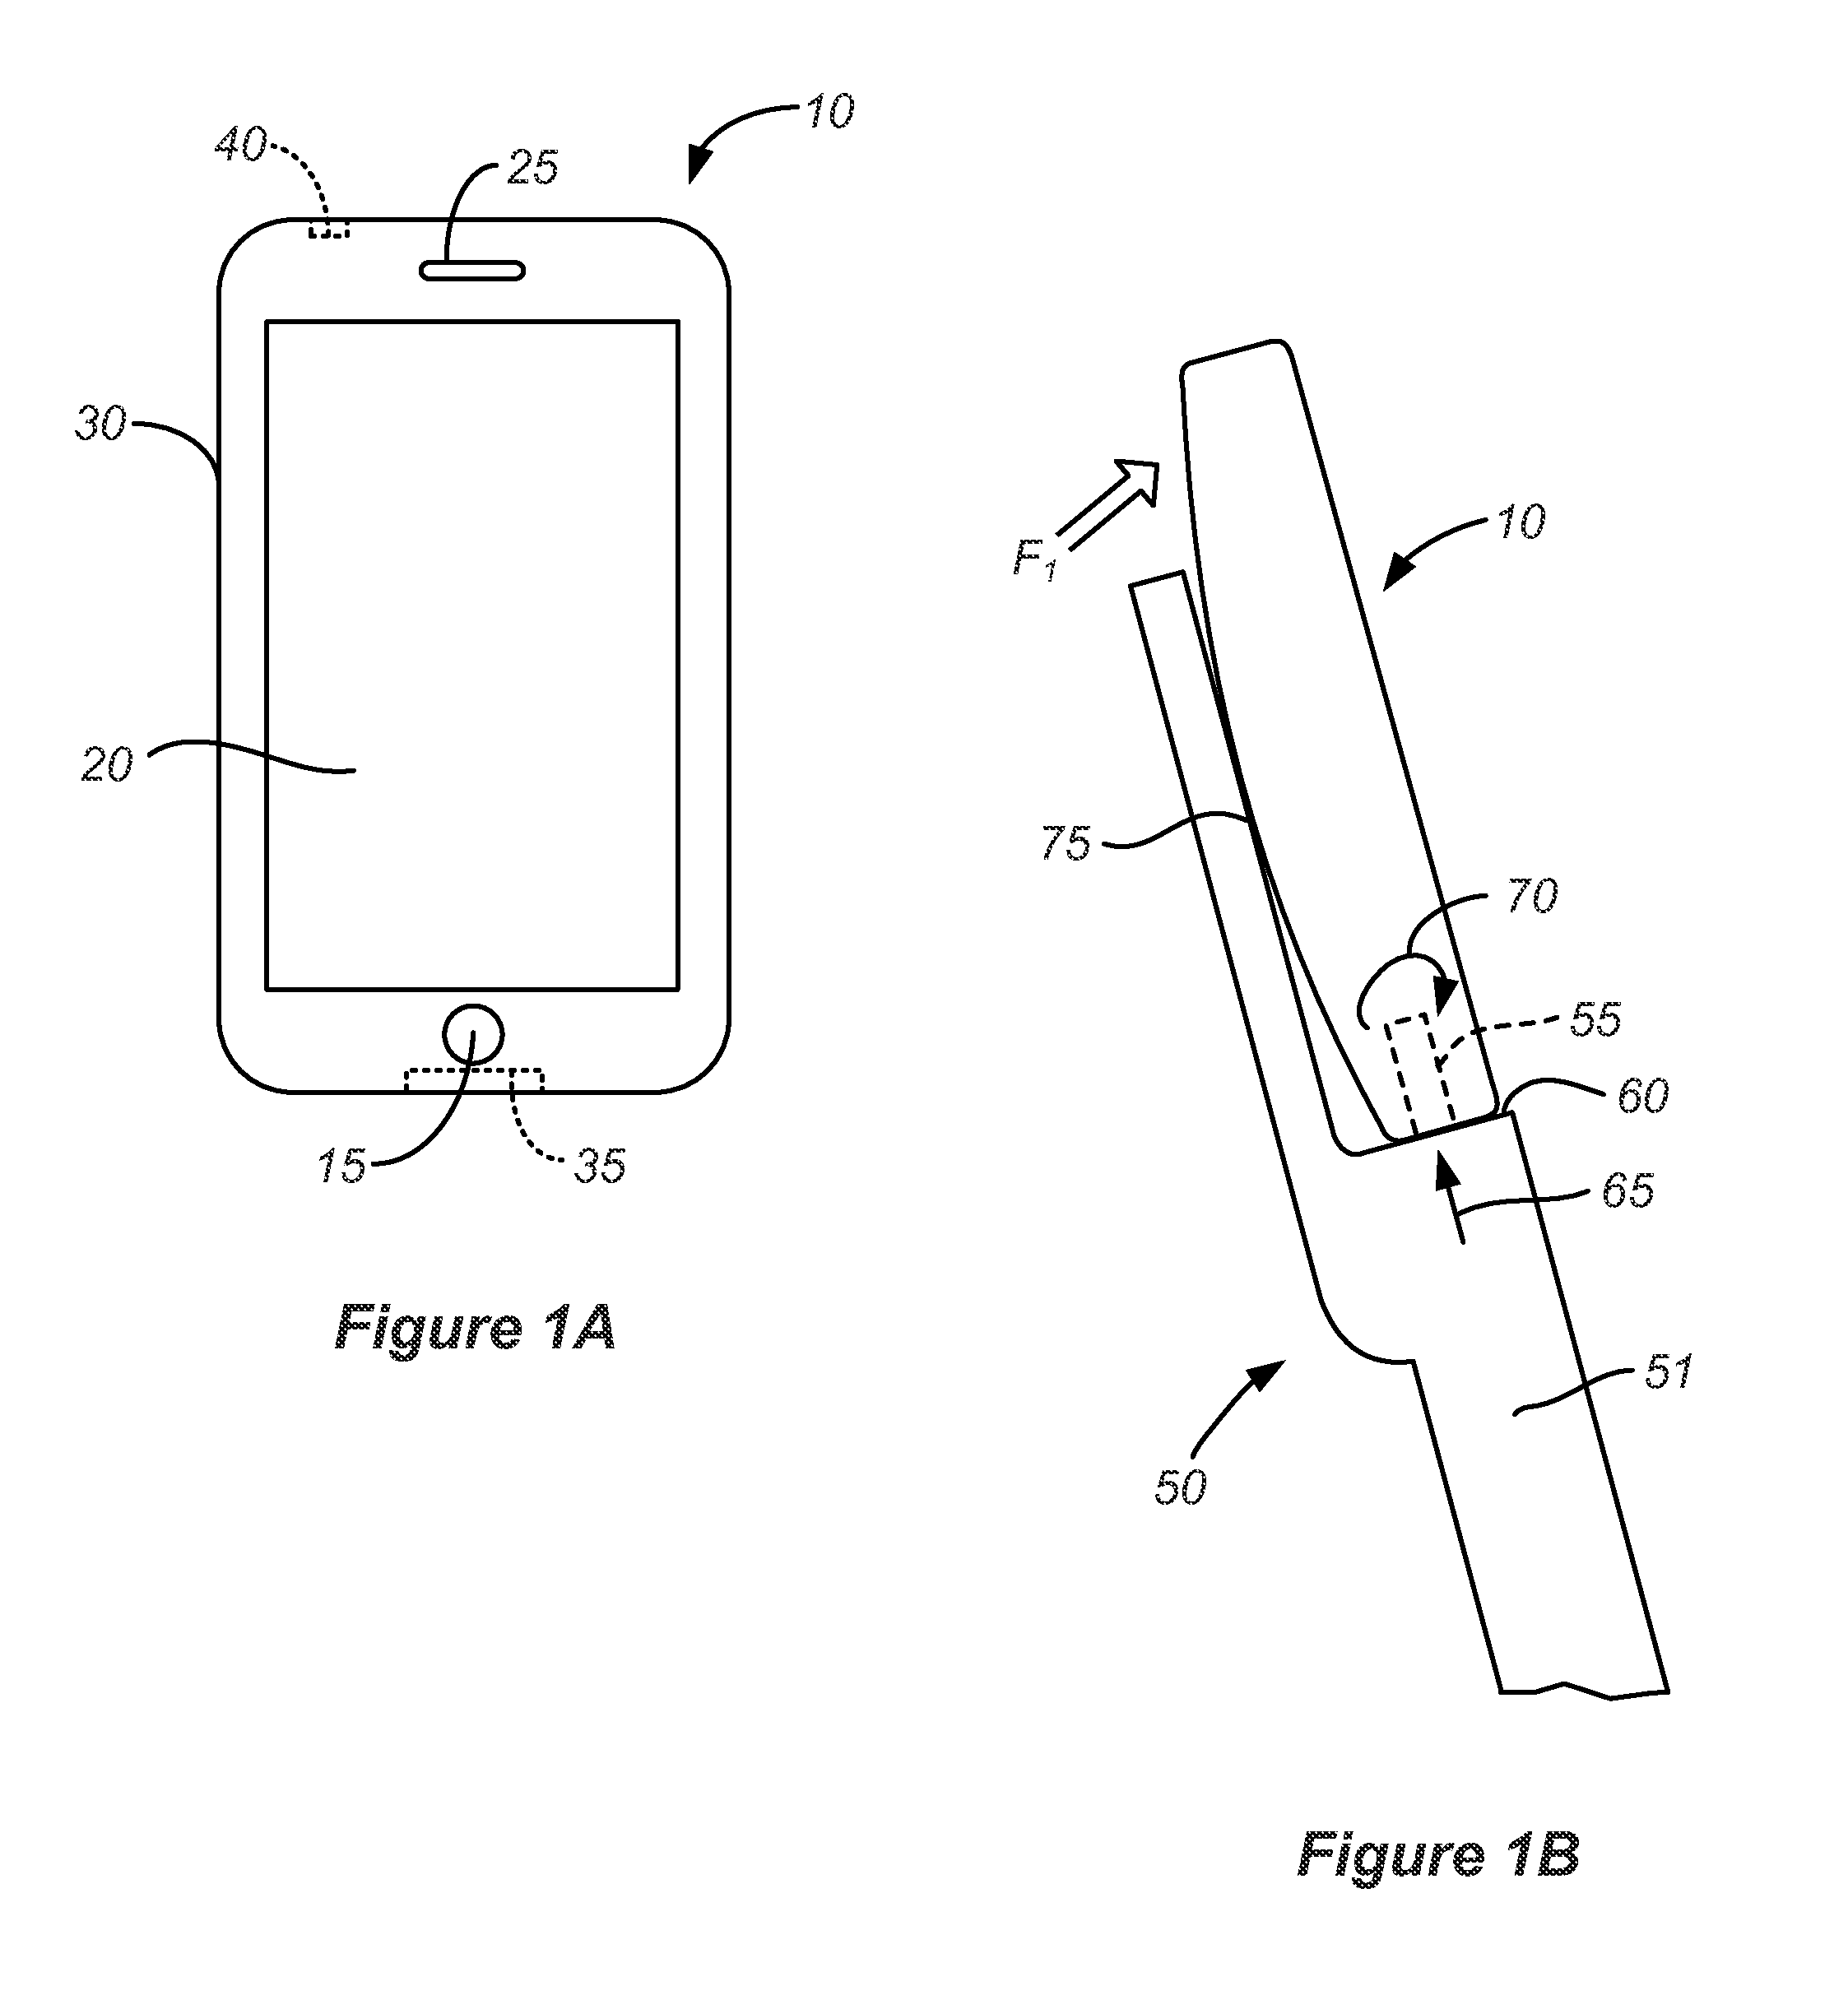 Self-retracting connector for docking device